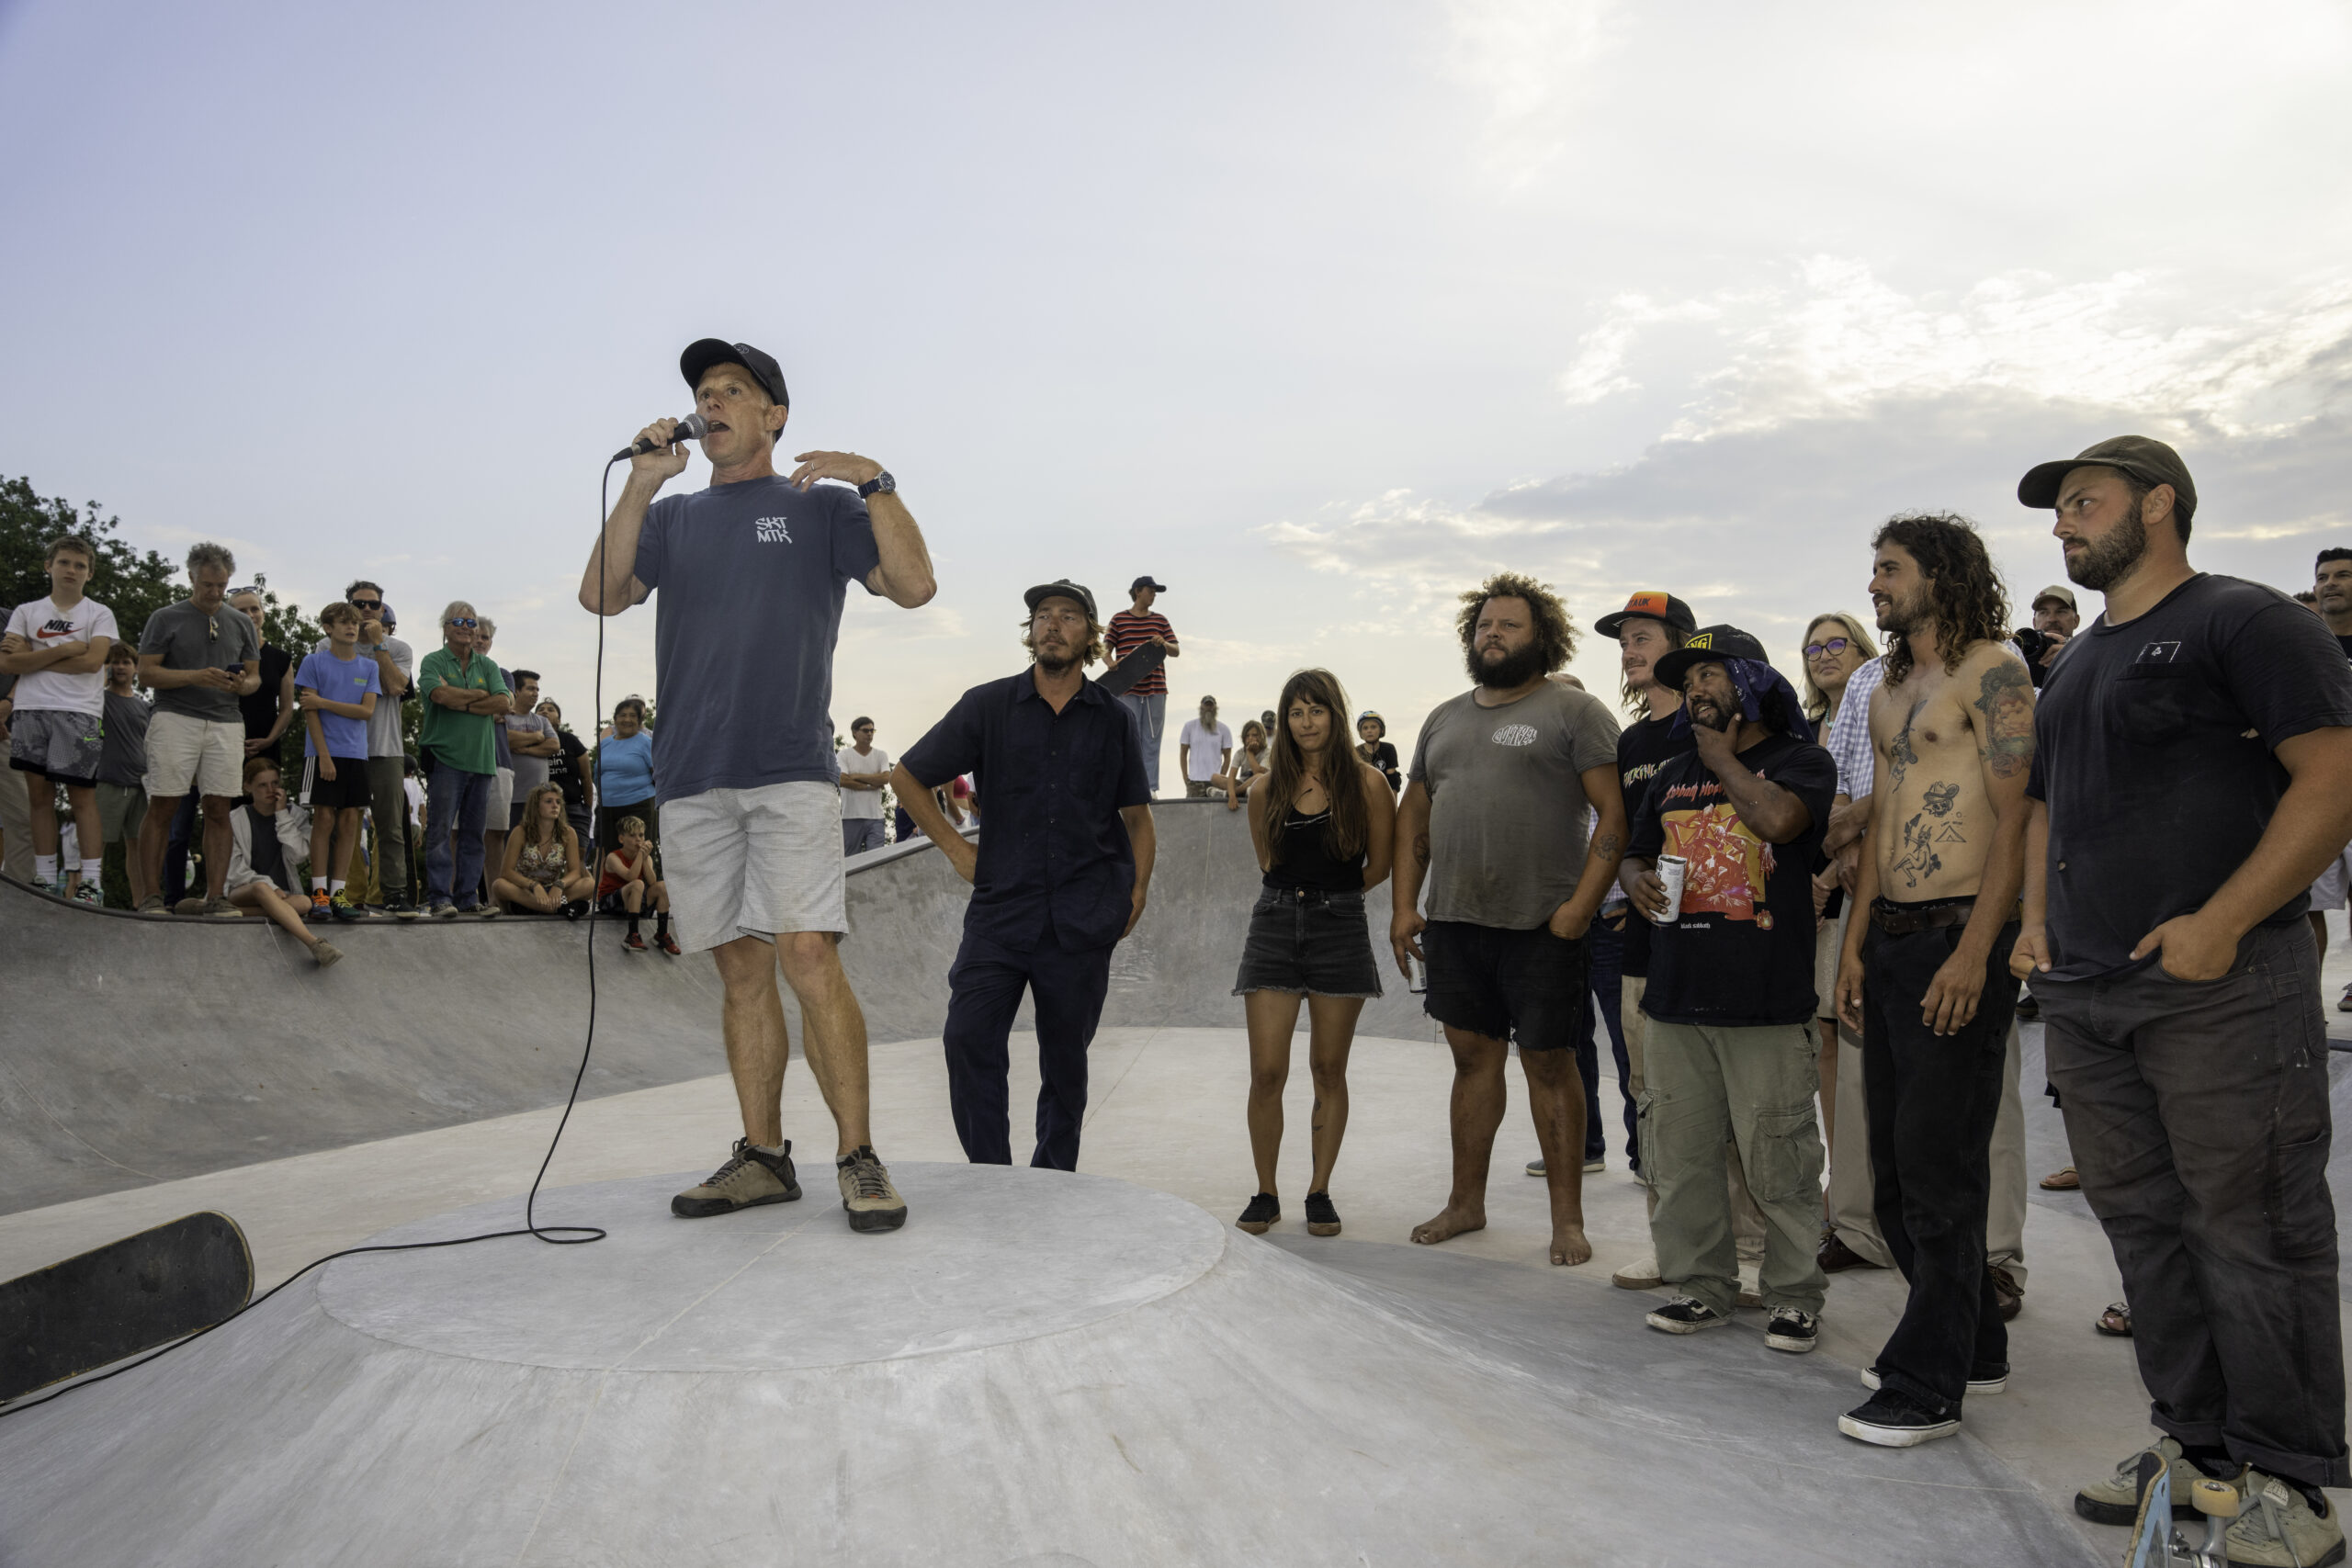 John Britton was one of several members of the Montauk Skate Park Coalition that helped make the dream of a fully revamped and expanded skate park in the town a reality. RON ESPOSITO